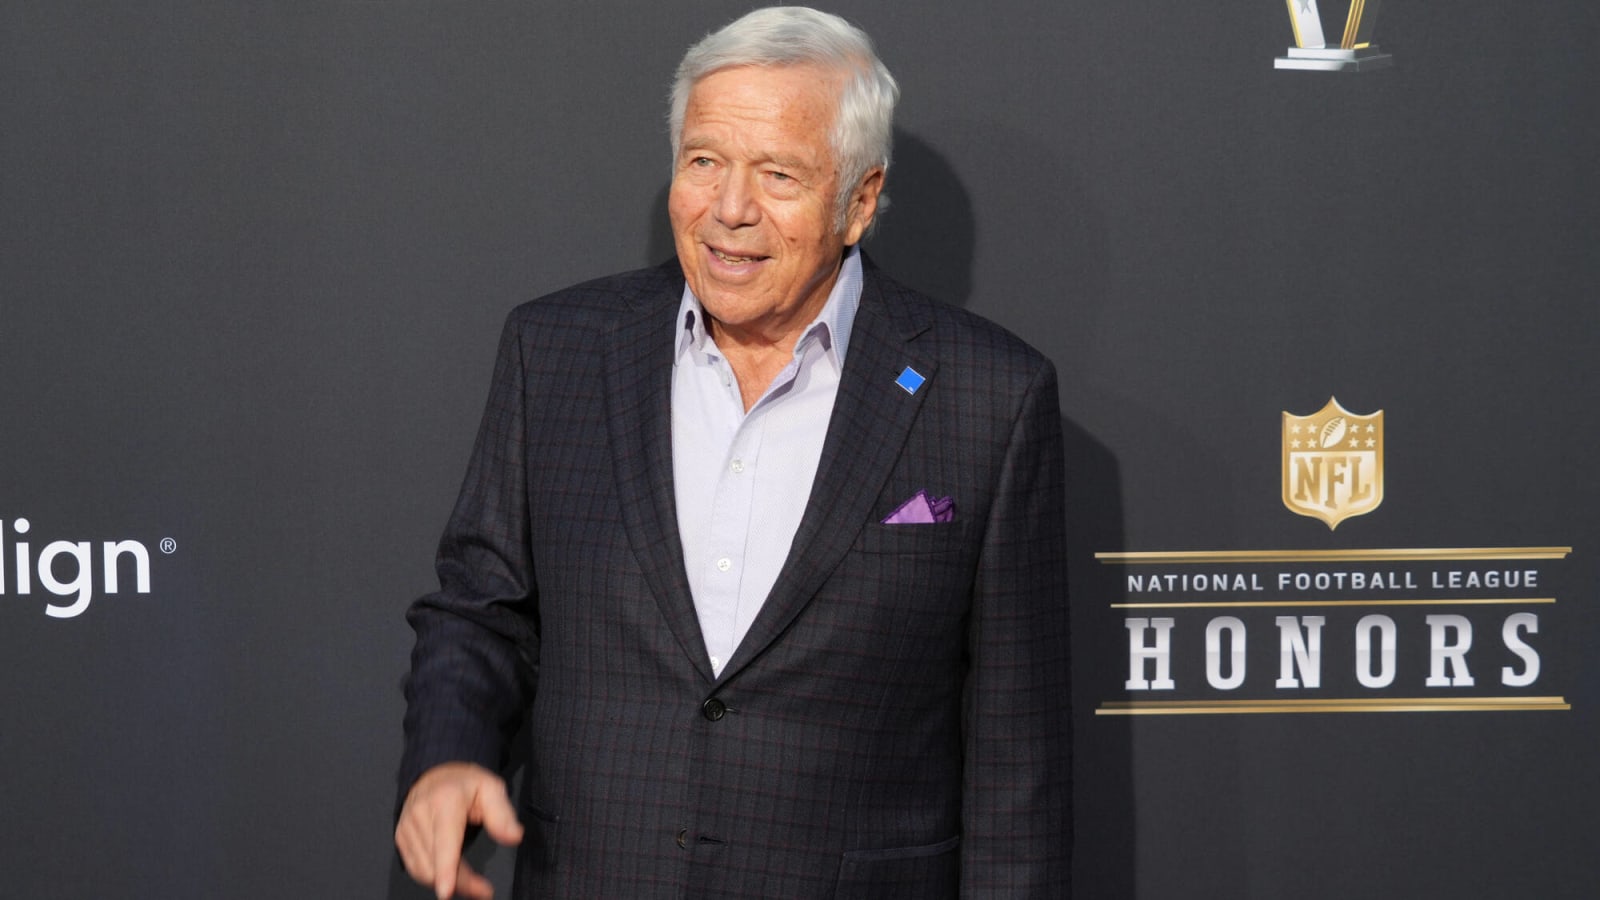 Patriots Kraft ‘Involved’ In Decision Making?  Zolak Says That’s Not the Case